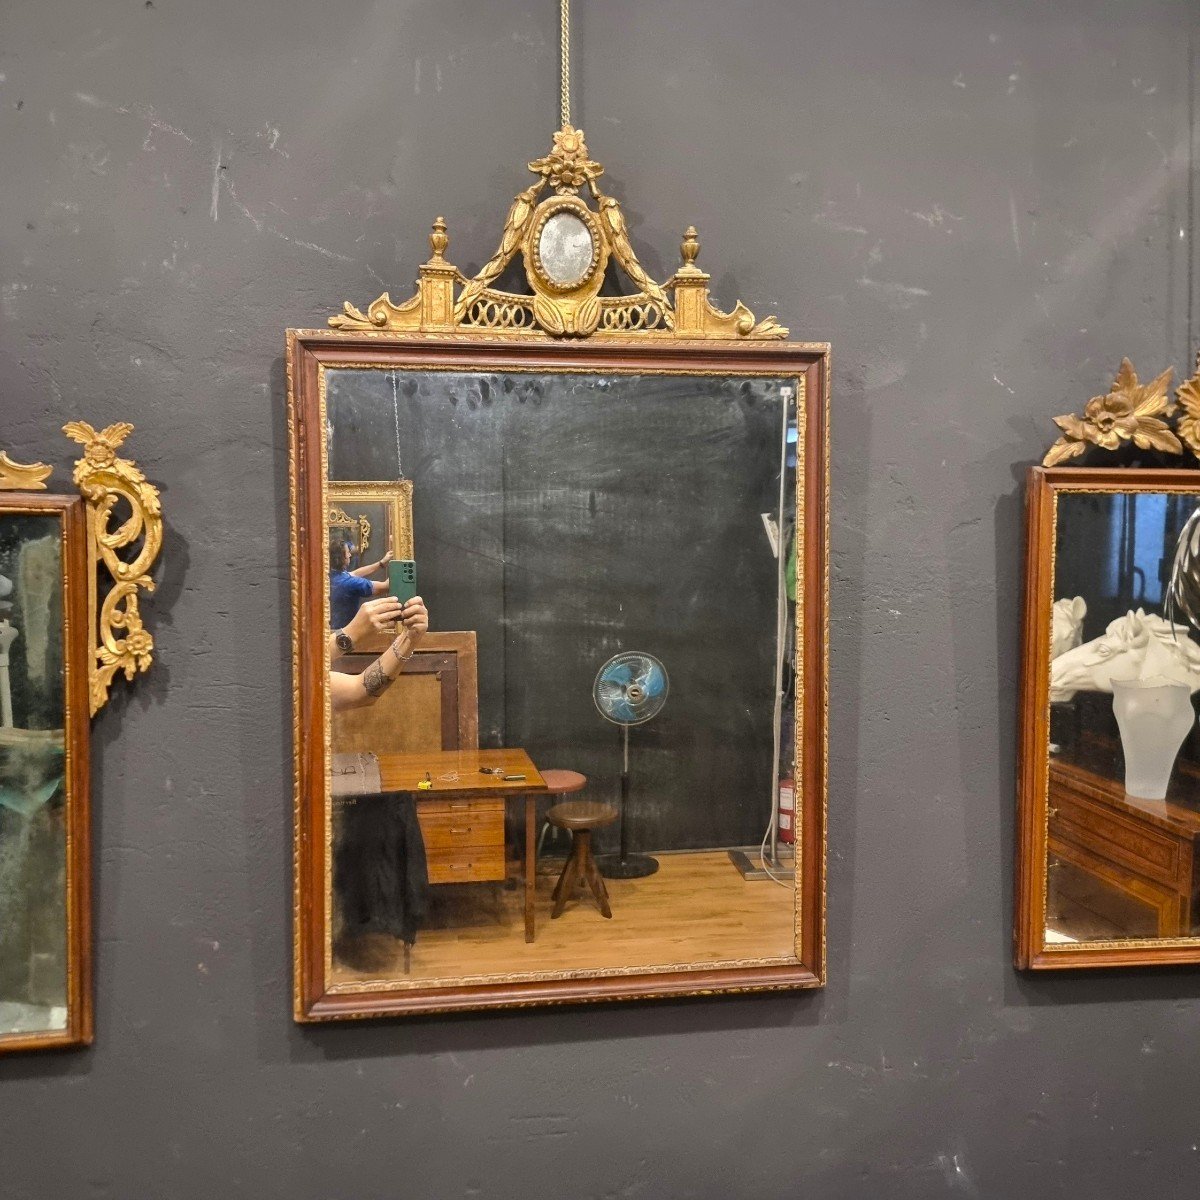 18th Century Mirror Frame In Louis XVI Style With Golden Crest From Venice-photo-1